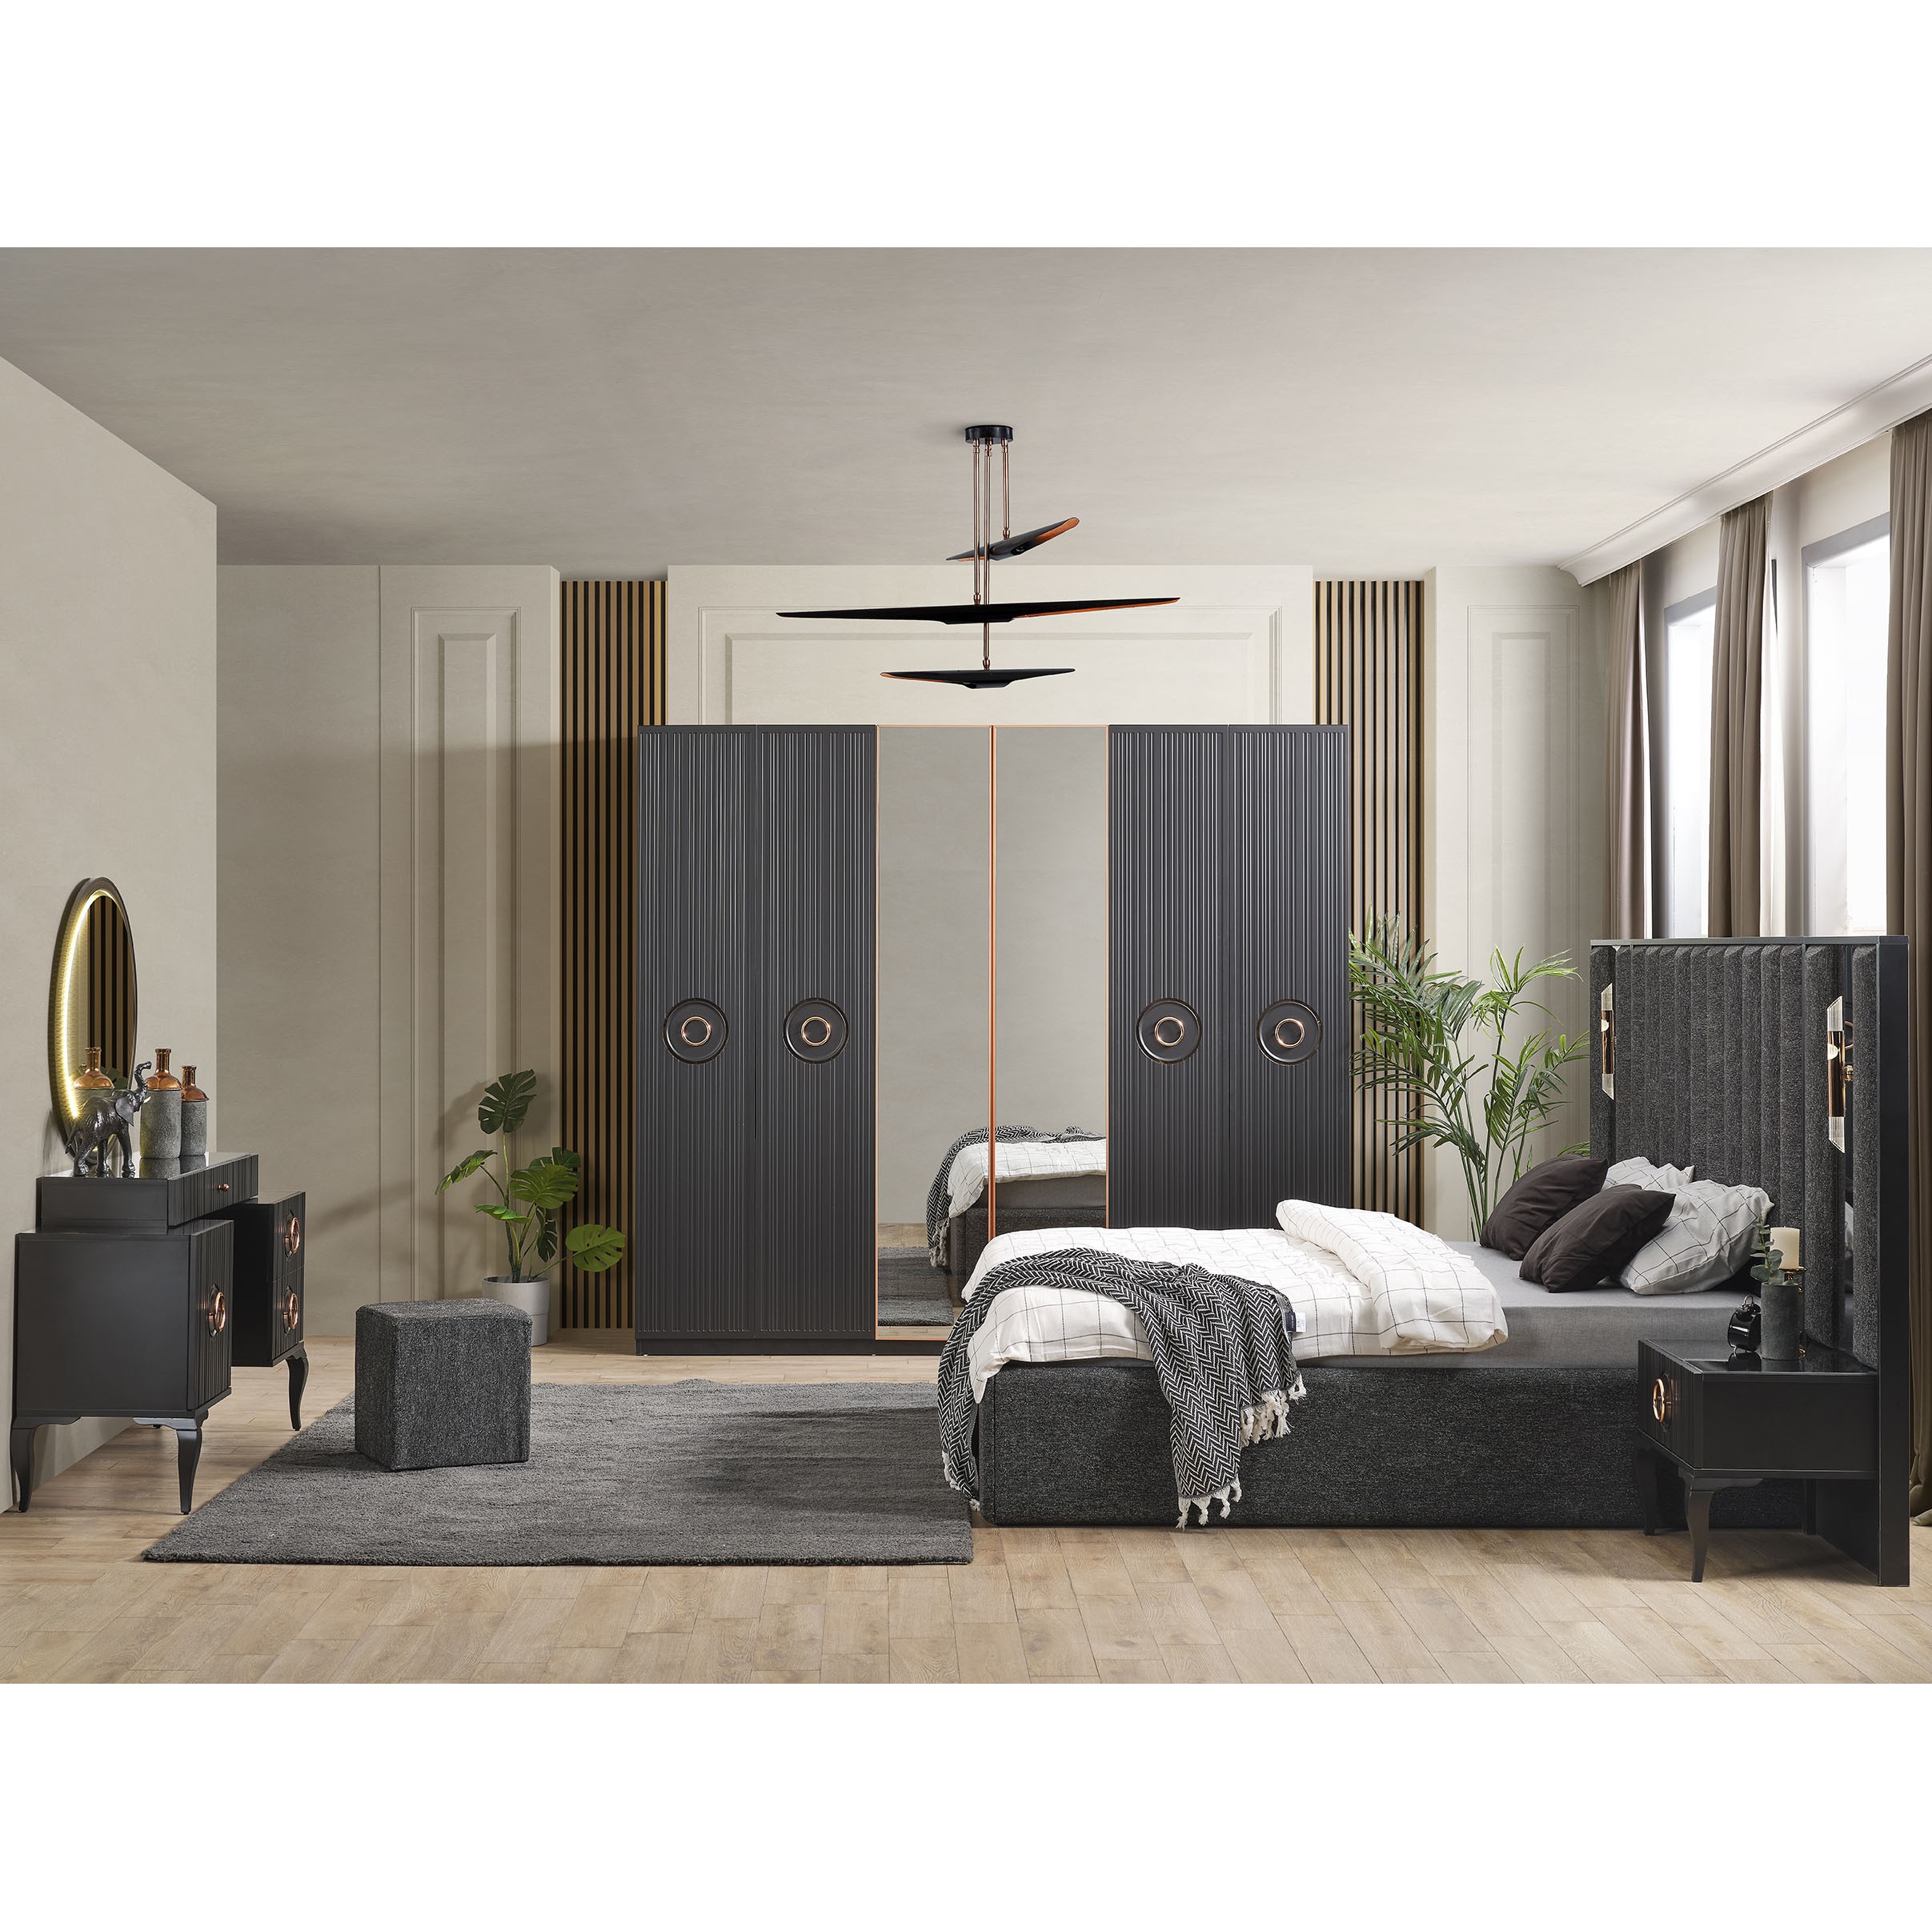 Style Larissa Vol2 Bed Without Storage 160x200 cm